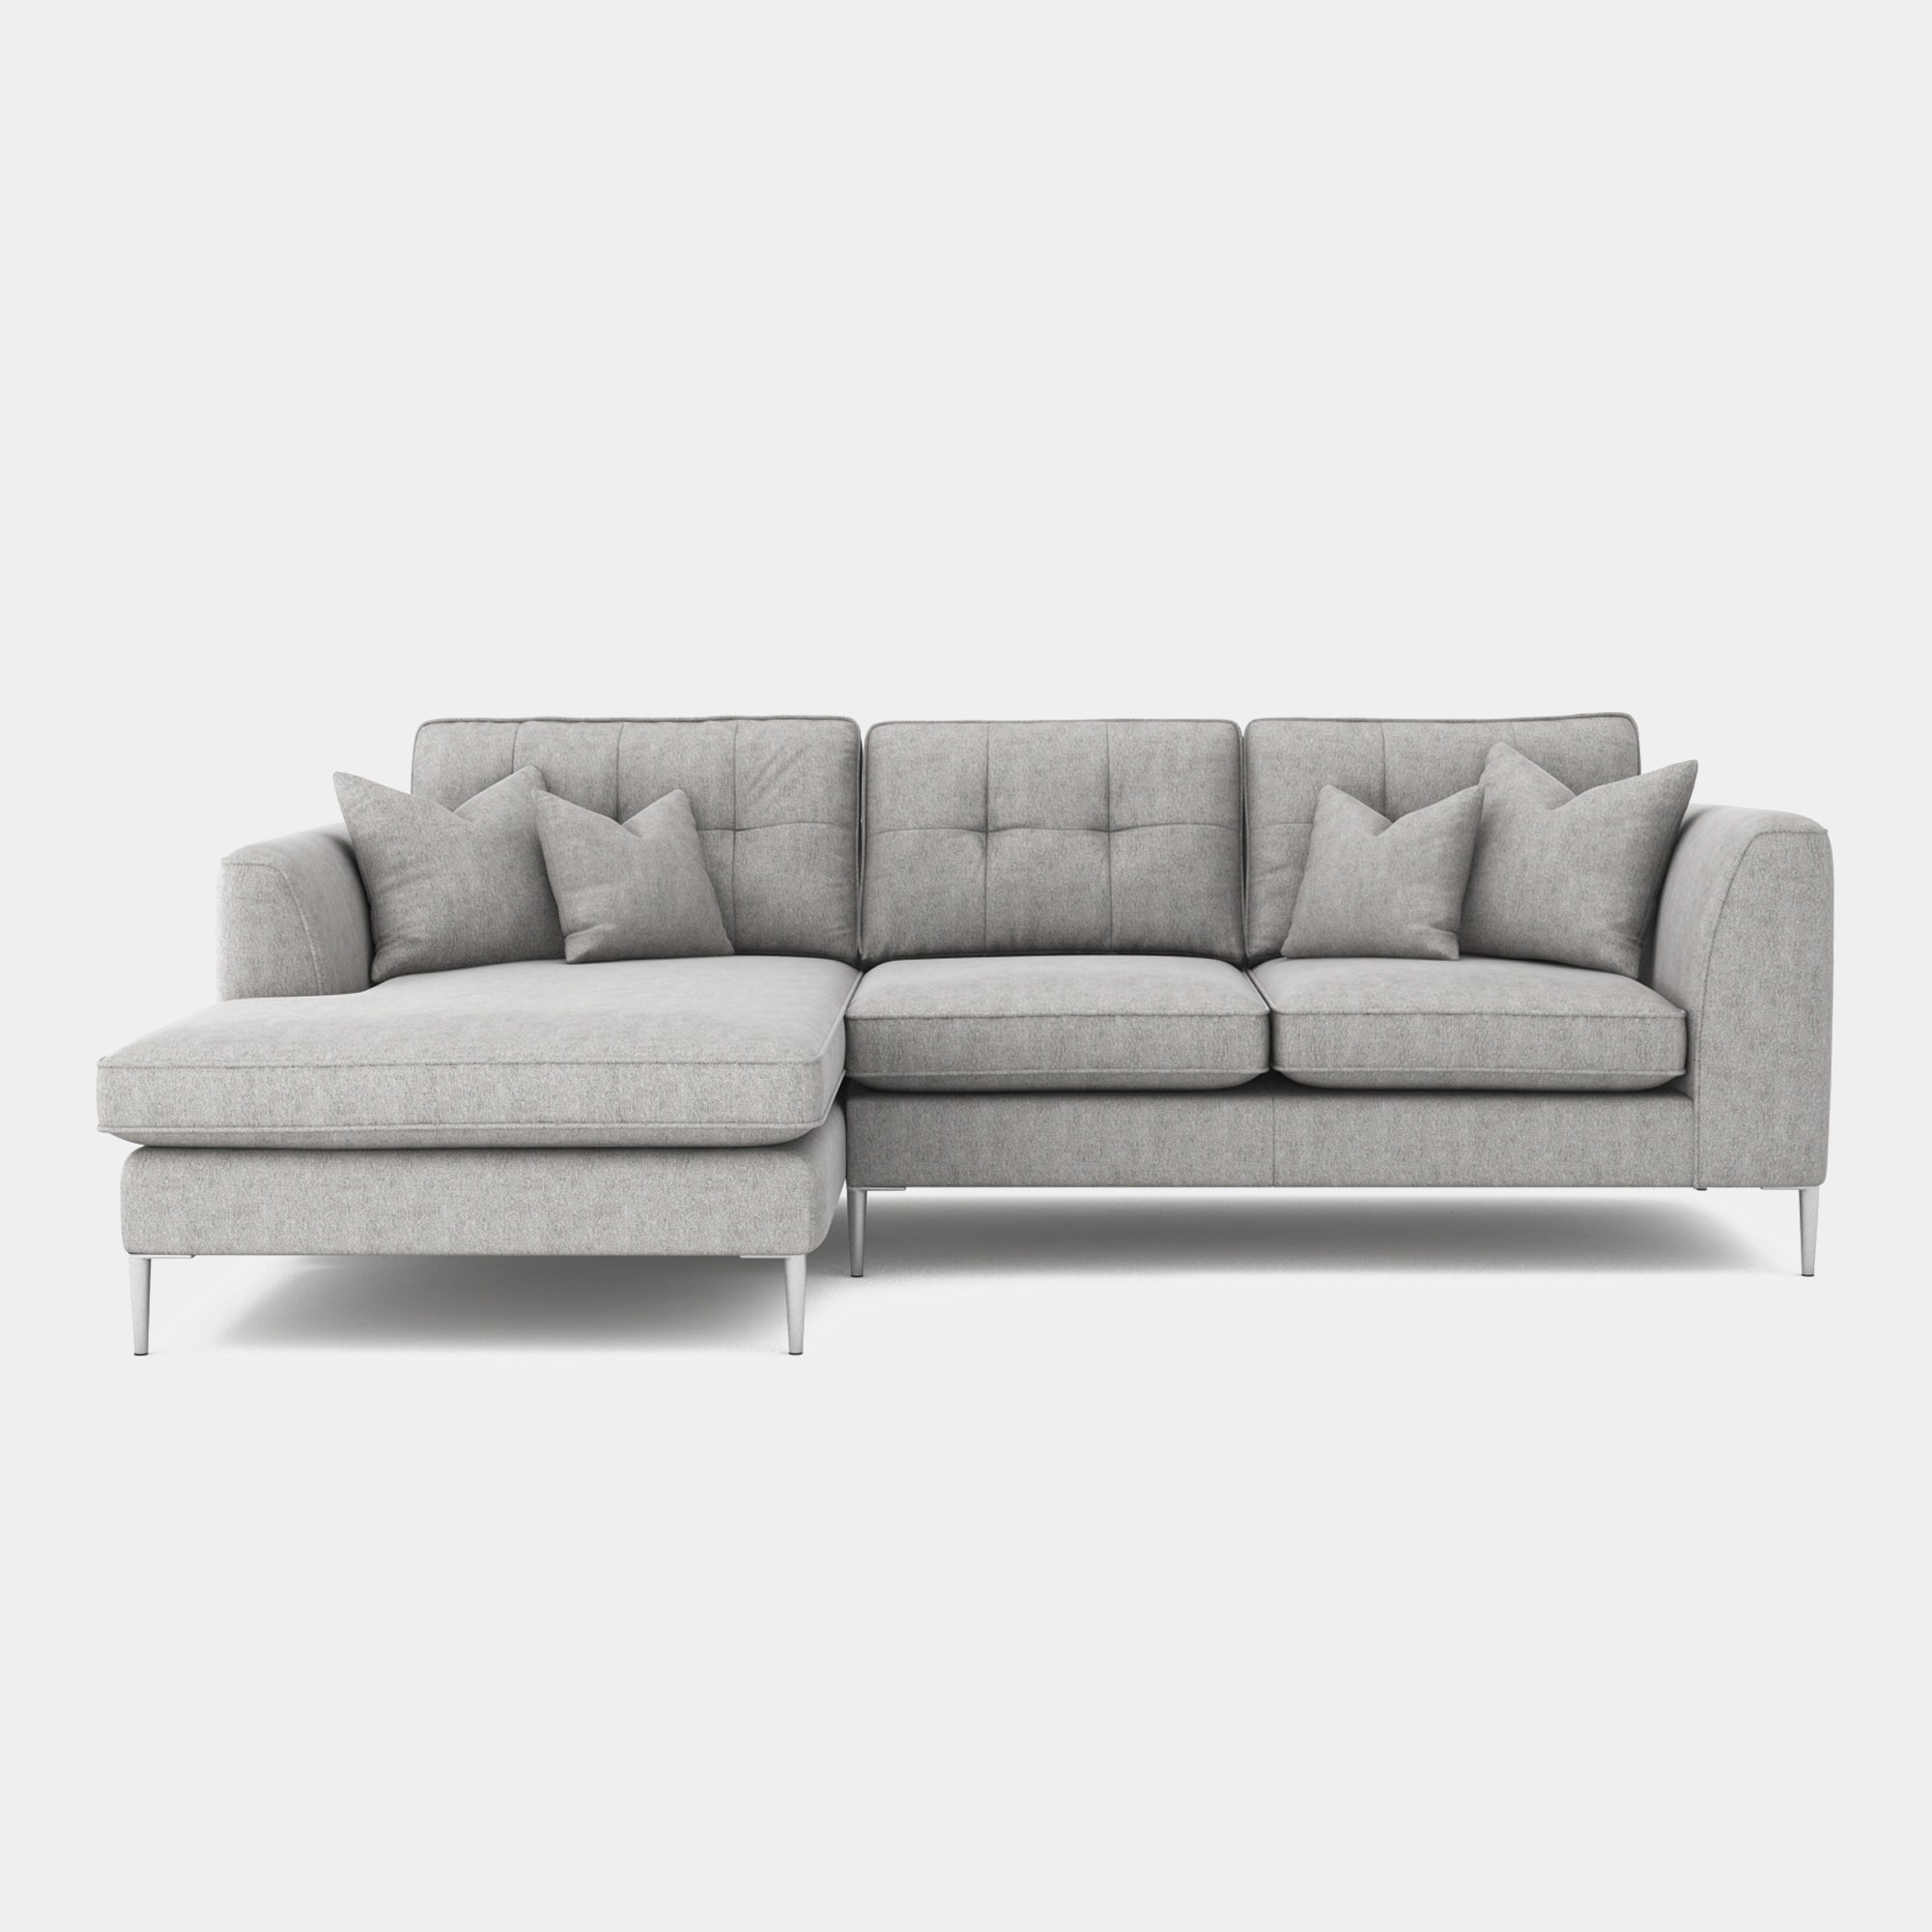 Colorado - Standard Back Small Chaise Sofa LHF Chaise With 3 Seat 1 Arm RHF In Grade B Fabric